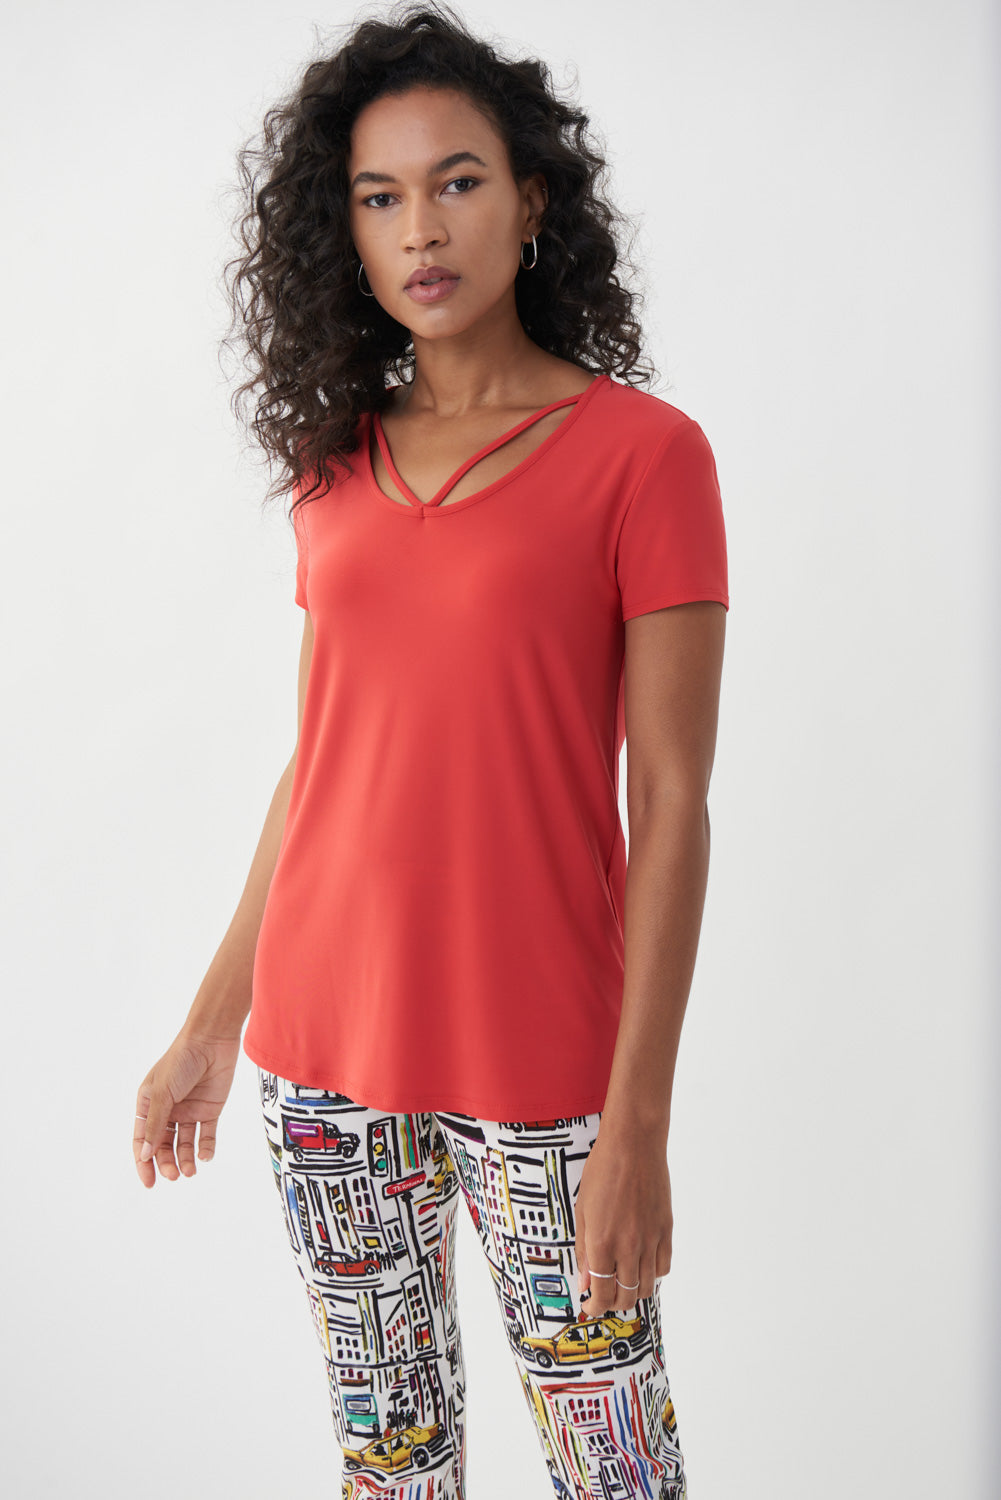 Joseph Ribkoff Lacquer Red Cut-Out Top Style 222136